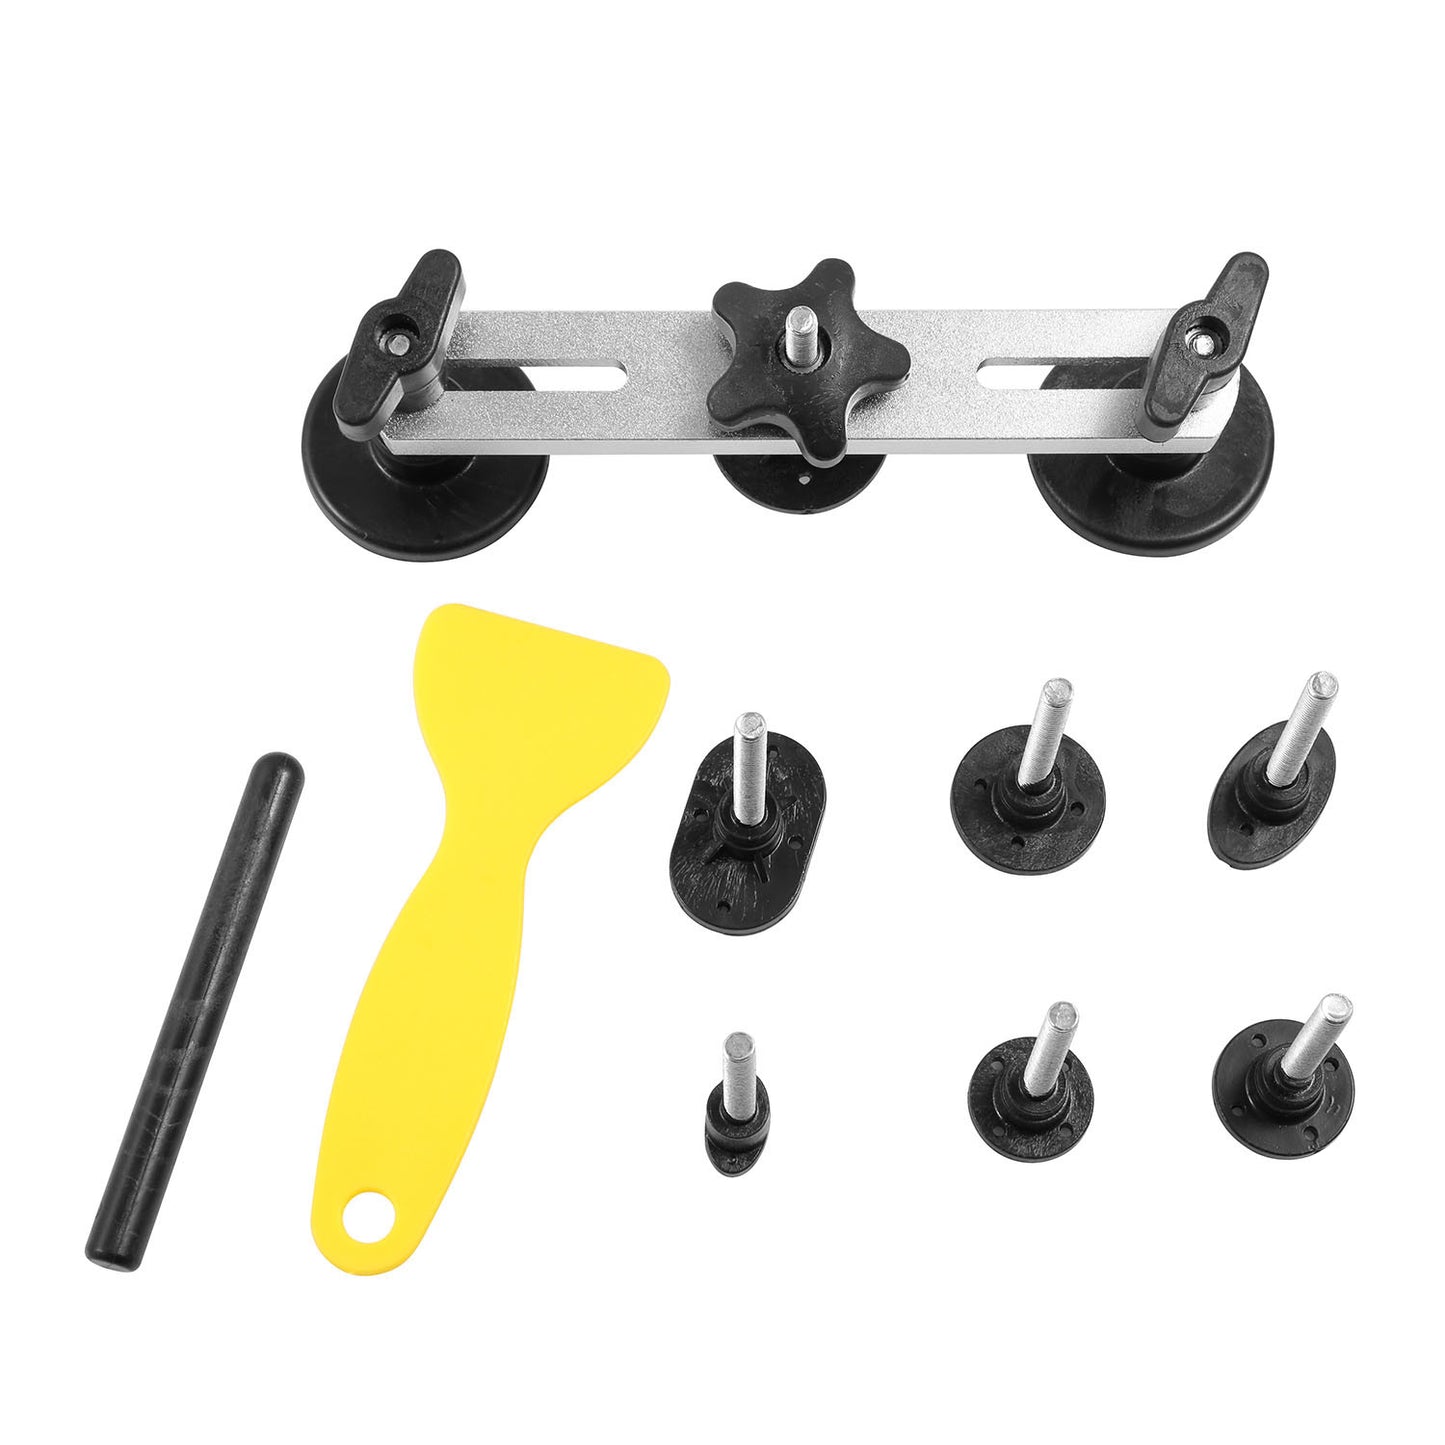 Auto Dent Repair Tools Car Dent Bridge Puller Body Dent Removal Kits for Car Motorcycle Refrigerator Washing Machine